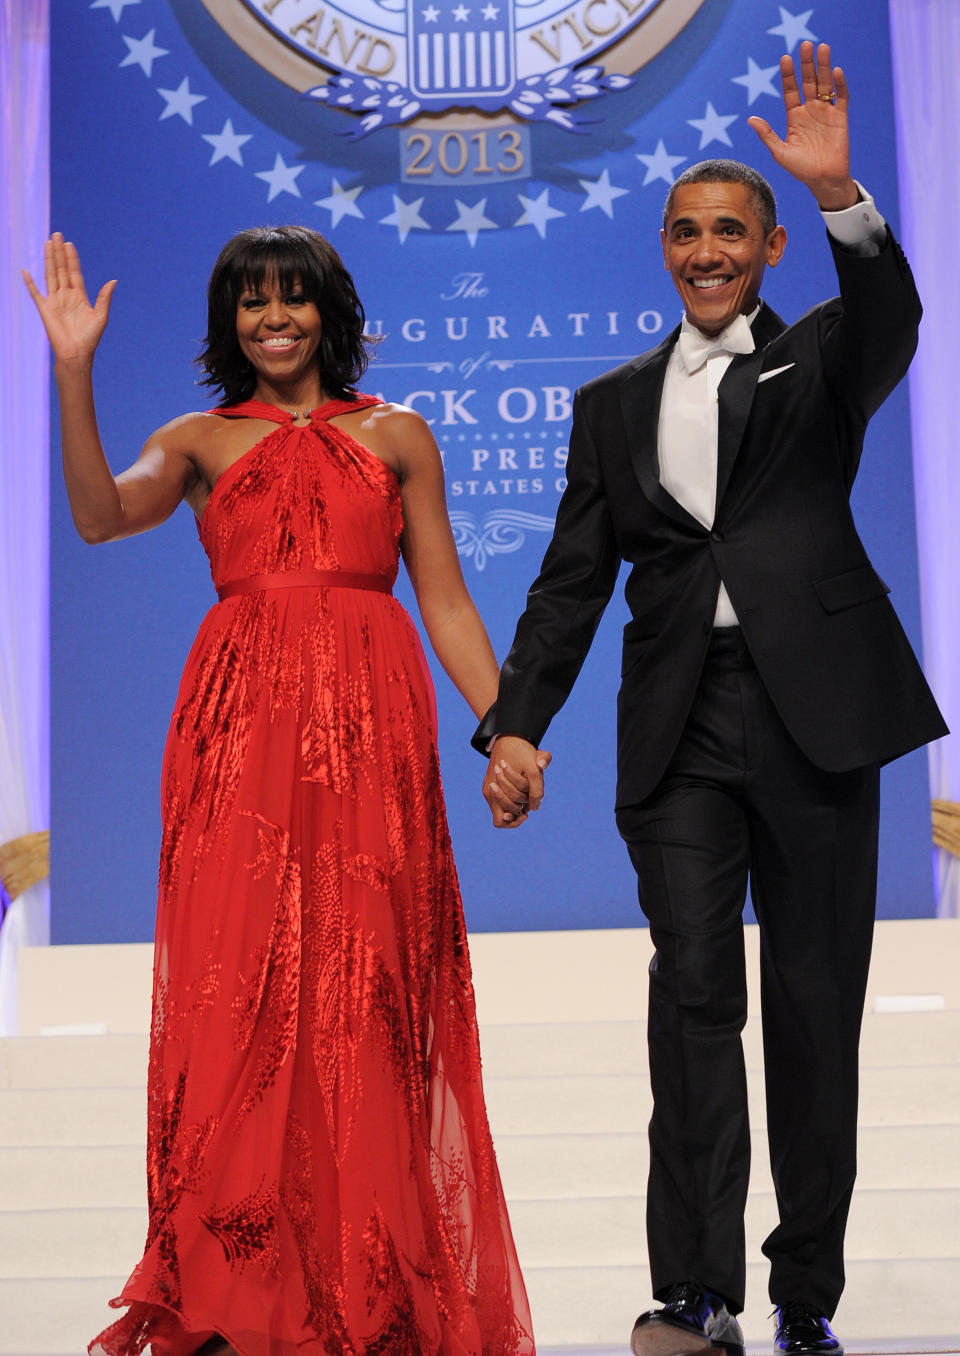 The couple attends one of 2013's inaugural balls. As she had four years earlier, the first lady wore a dress designed by Jason Wu that drew plaudits from the fashion world.